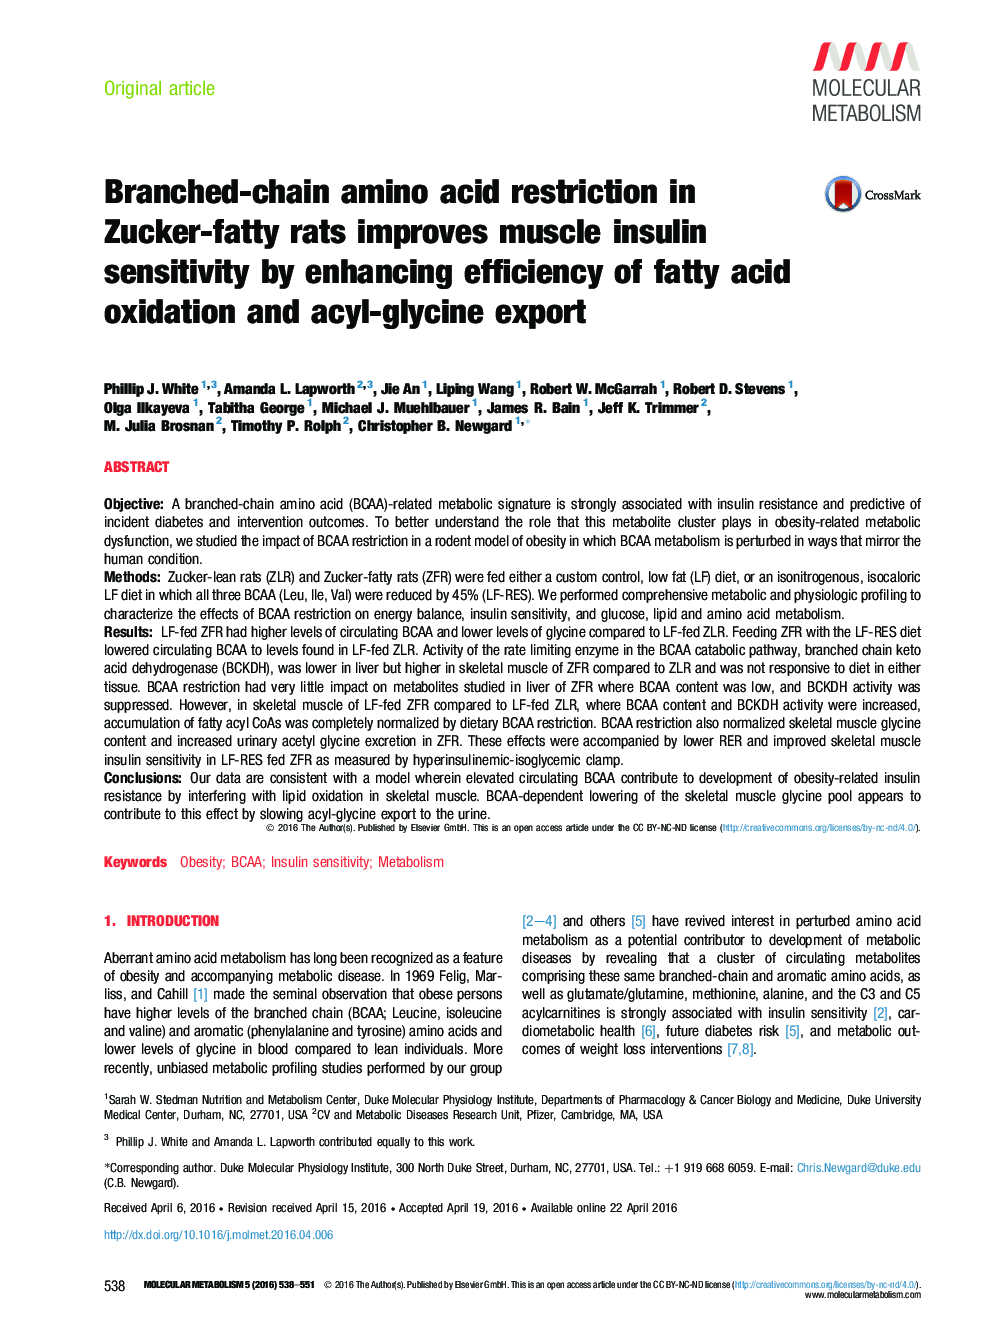 Branched-chain amino acid restriction in Zucker-fatty rats improves muscle insulin sensitivity by enhancing efficiency of fatty acid oxidation and acyl-glycine export